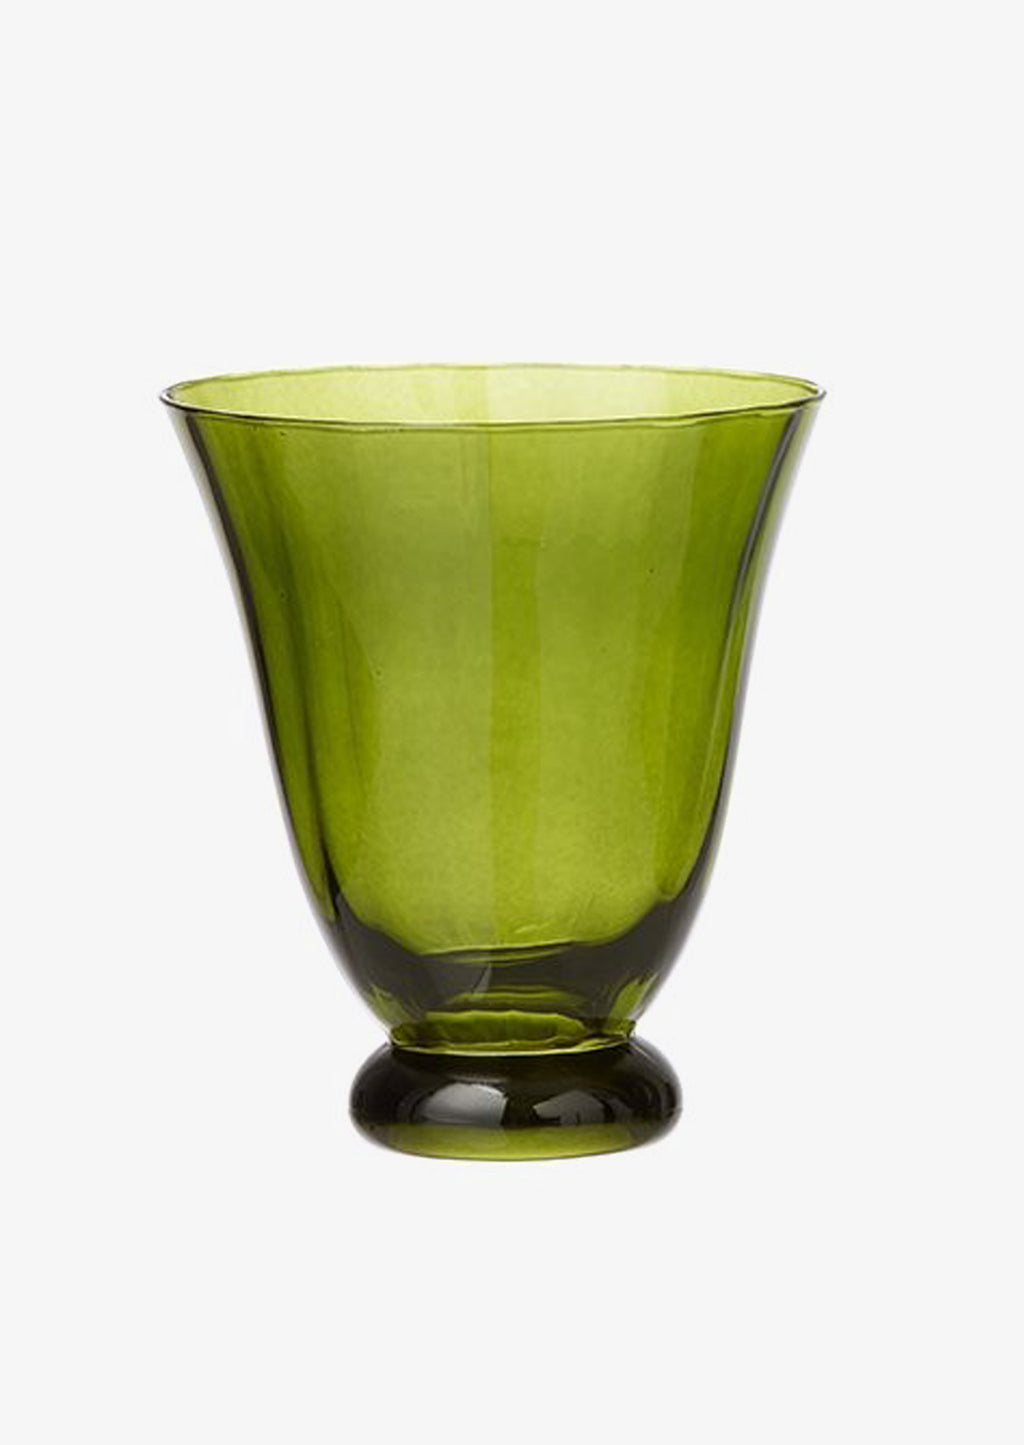 Olive Green: A footed water glass in olive green tint.